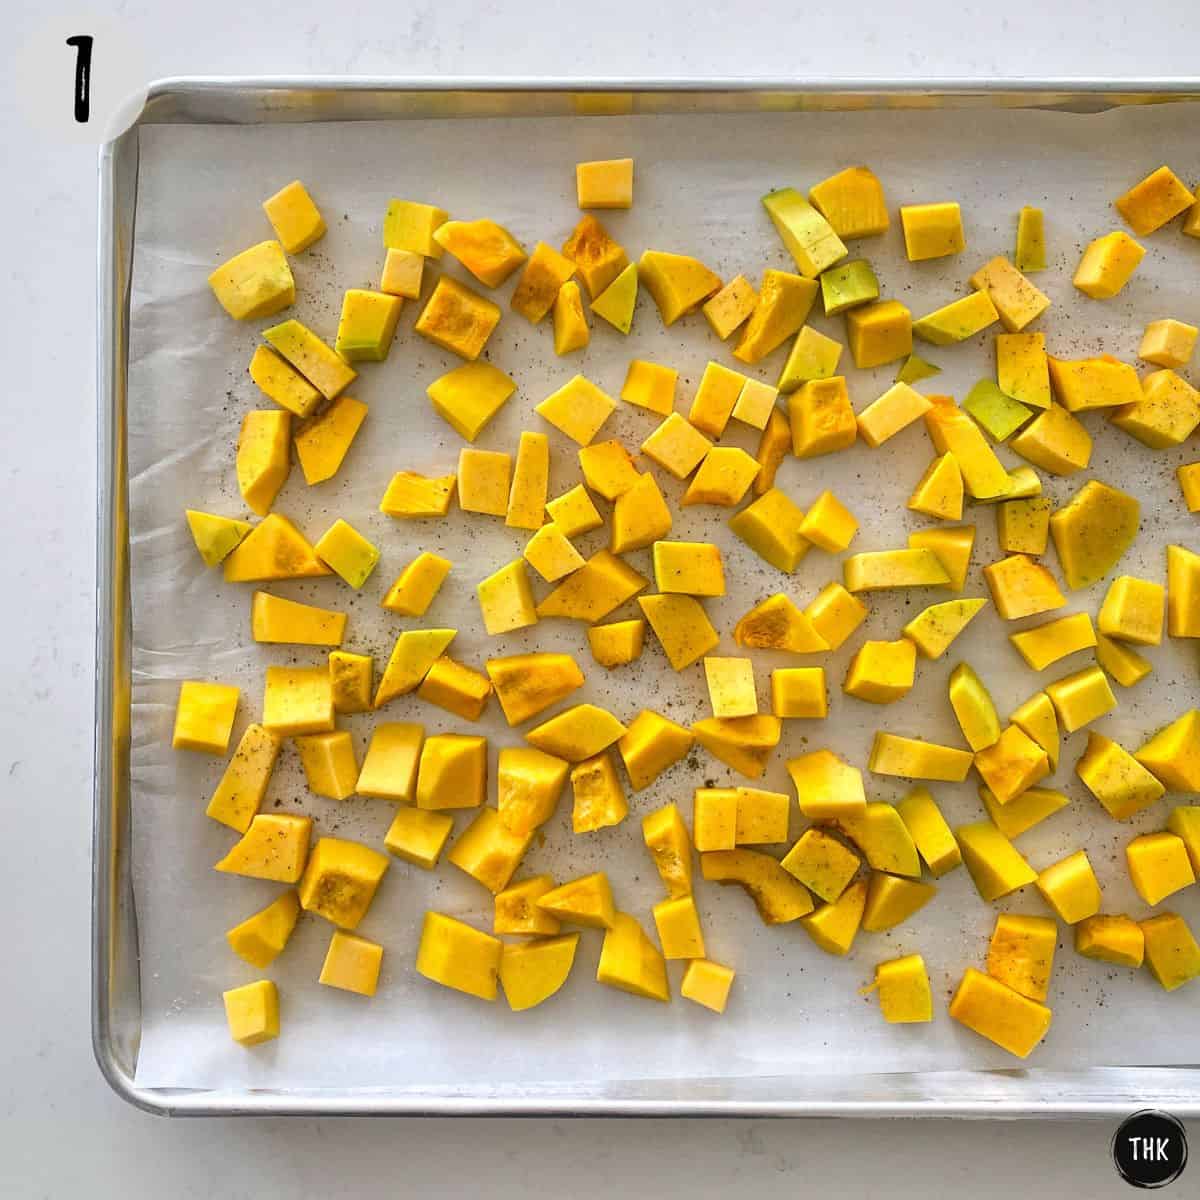 Cubed butternut squash in baking tray.